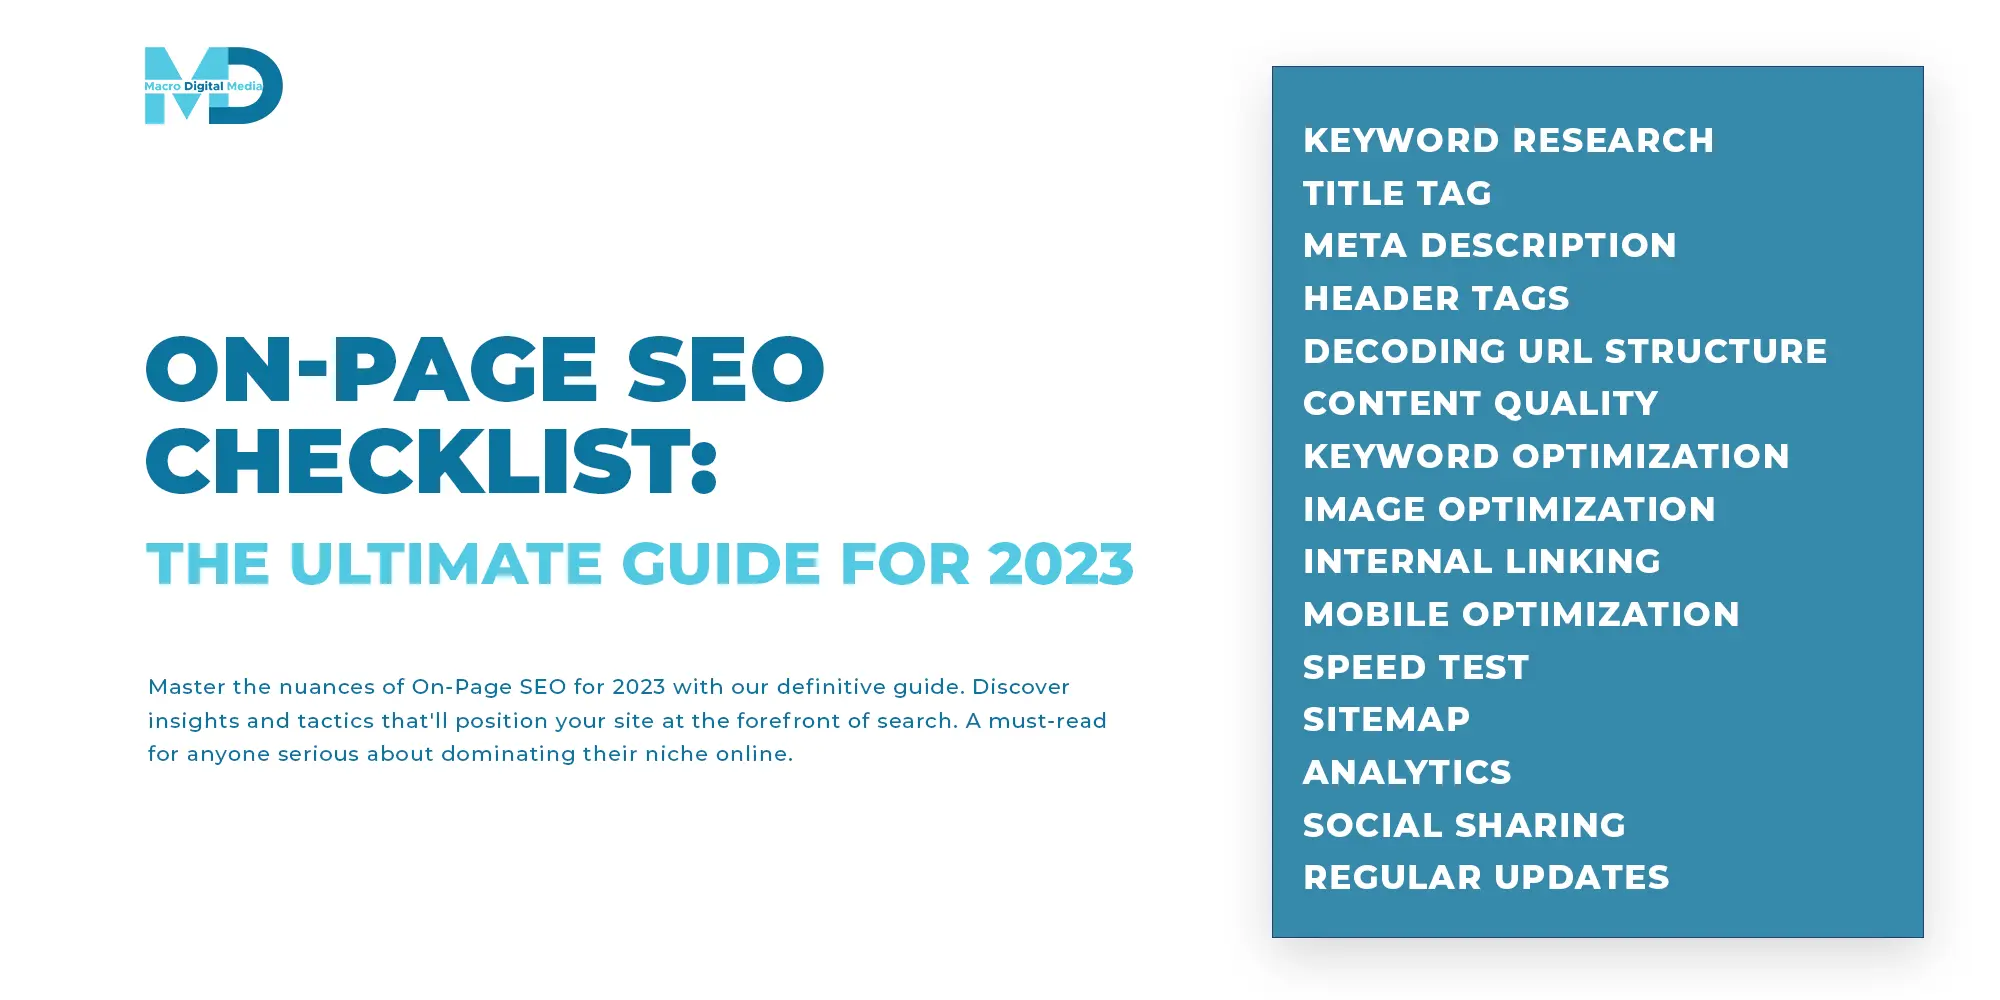 9-Step Ultimate Off-Page SEO Checklist for Lasting Results - 10Web